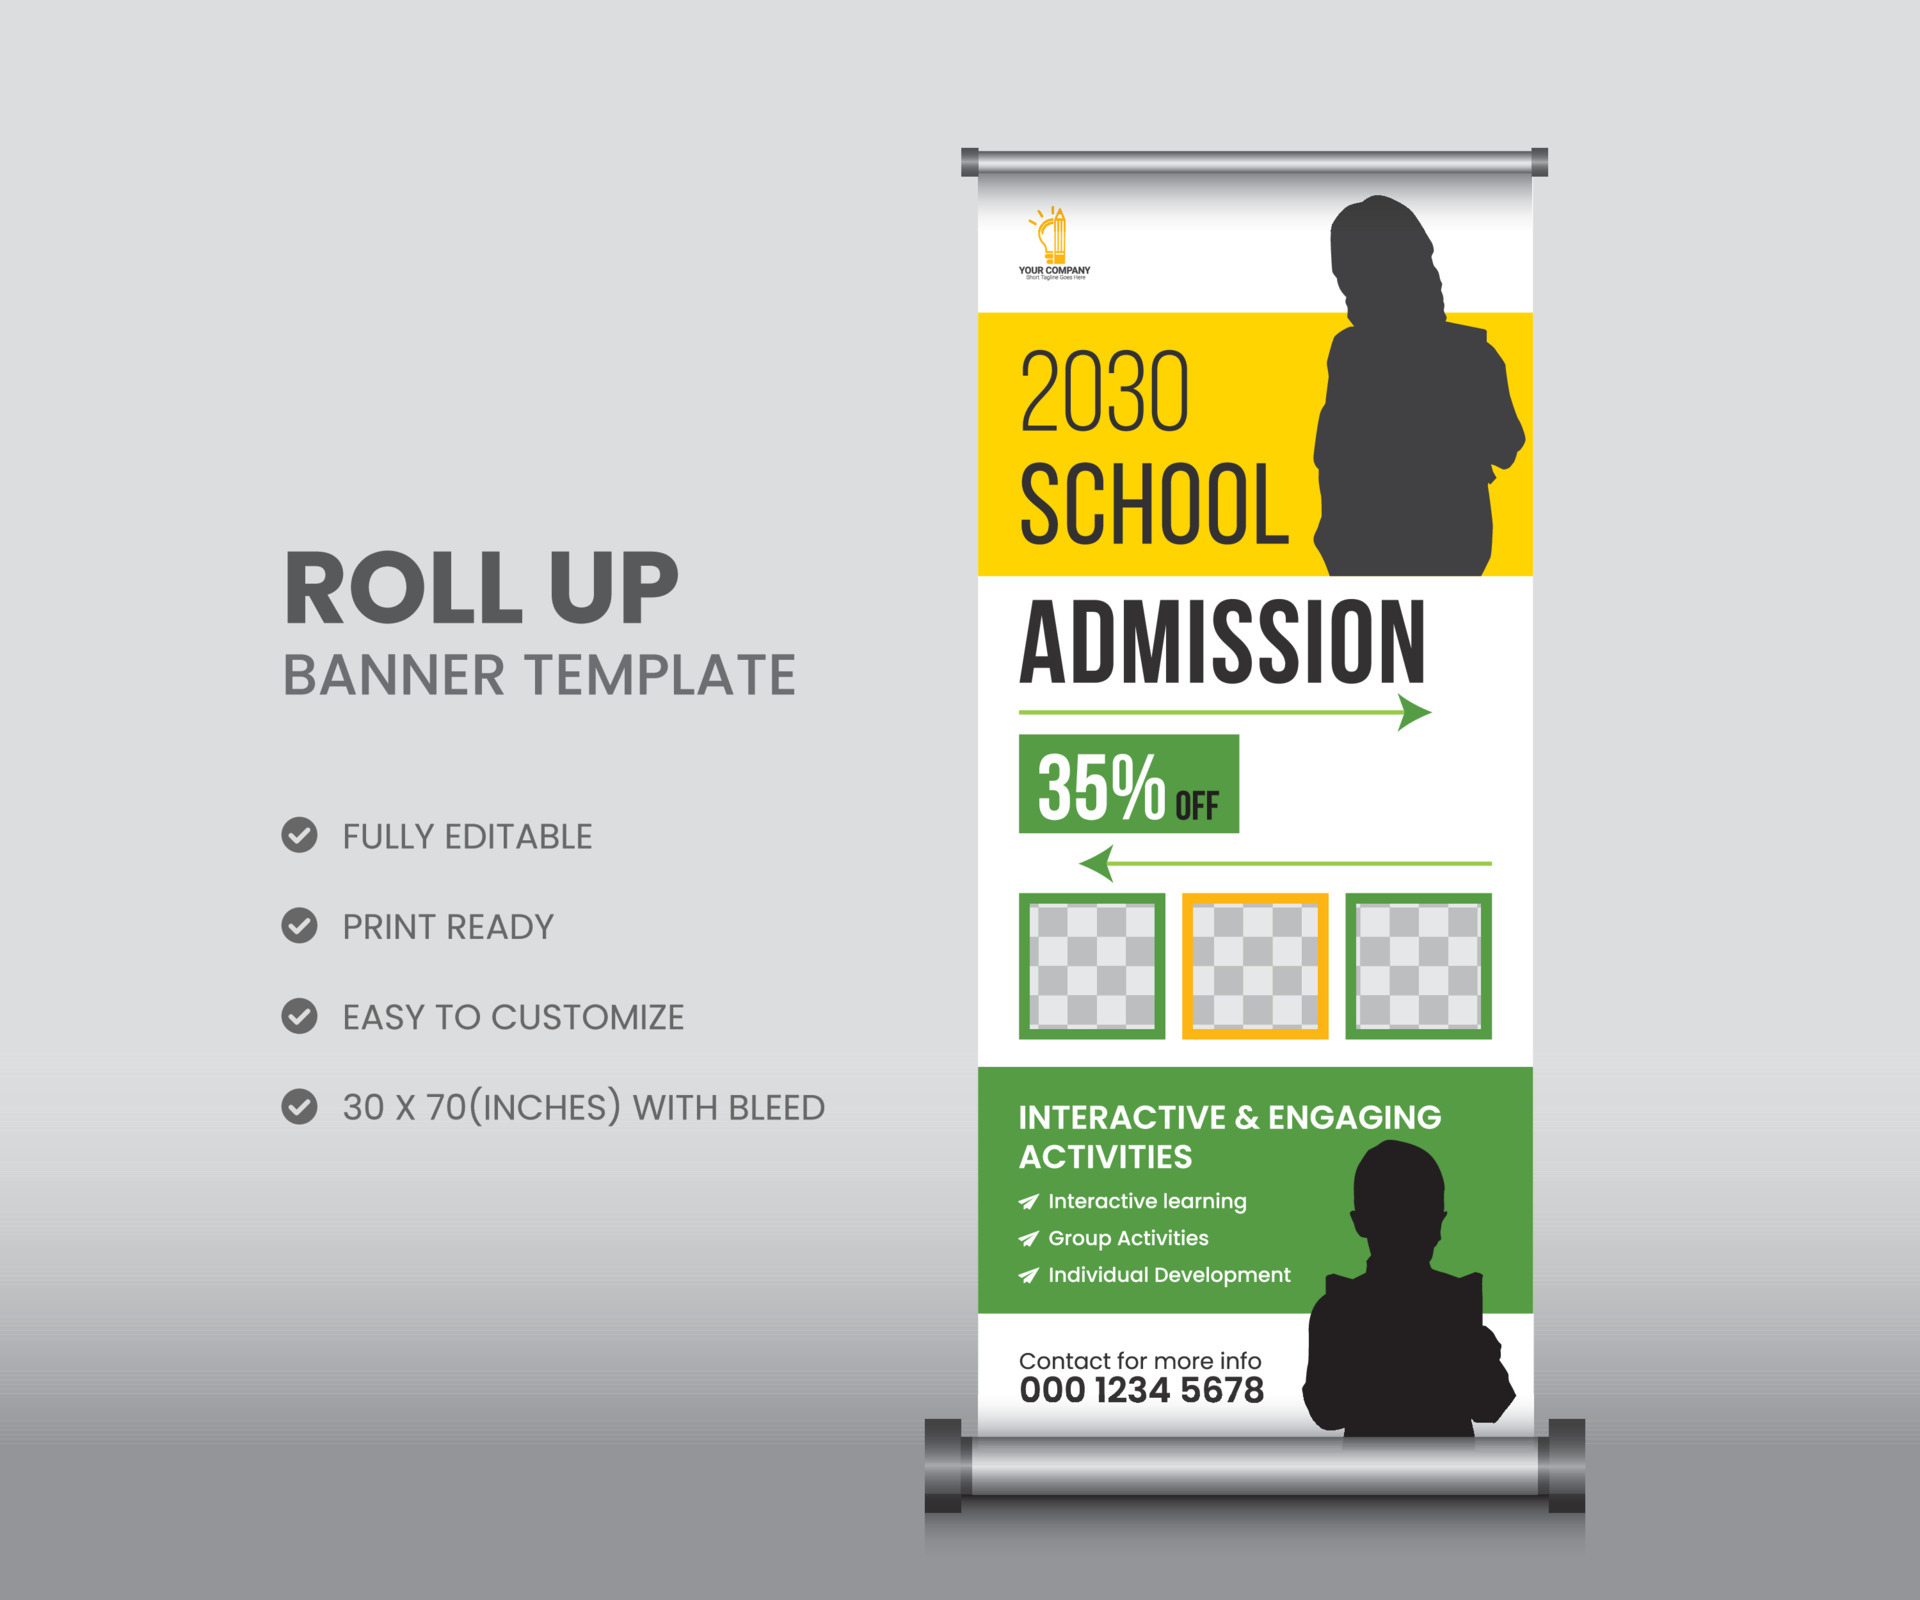 School admission roll up banner template